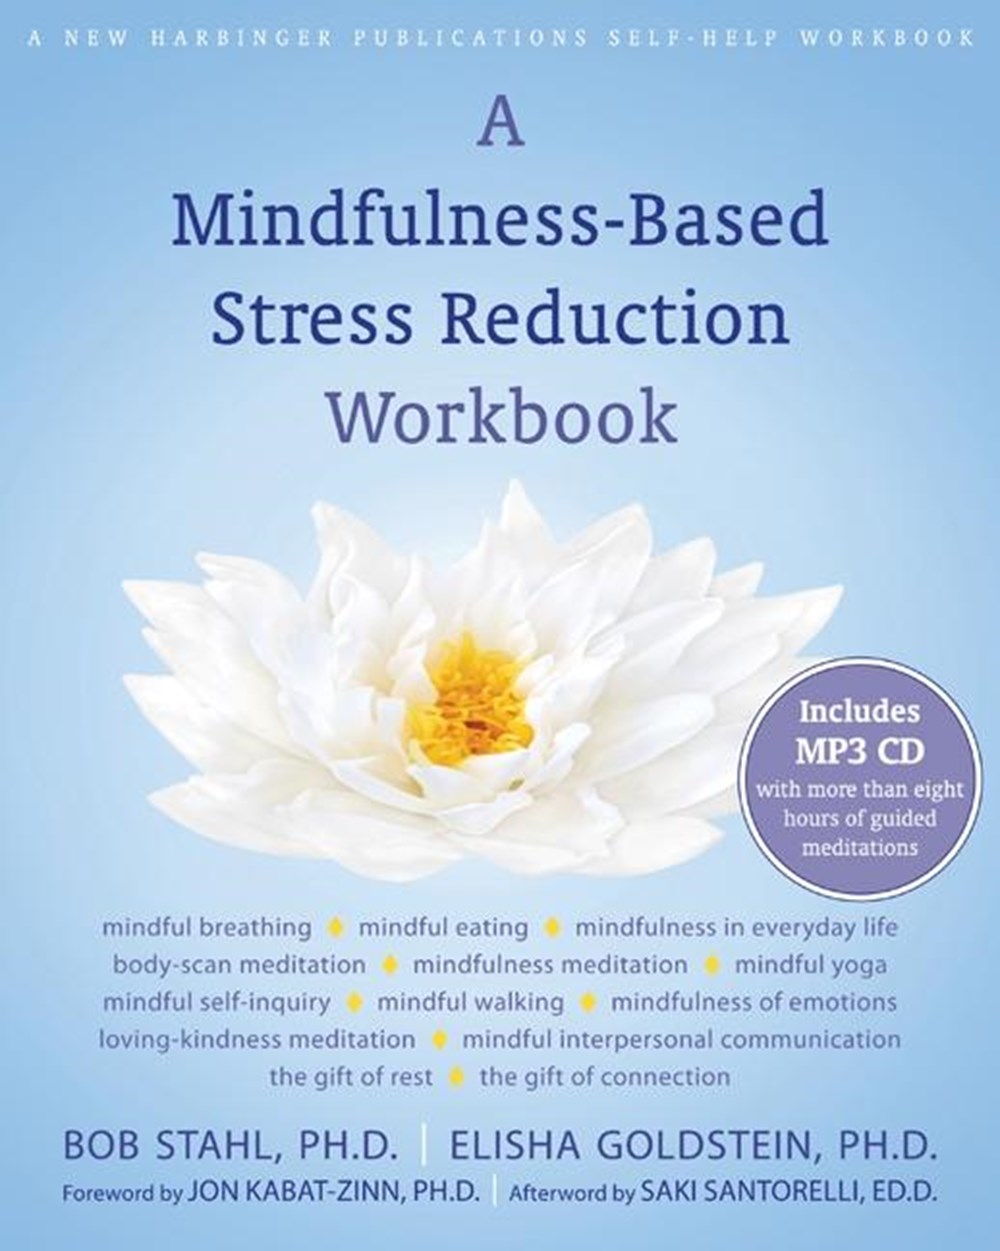 Mindfulness Based Stress Reduction Workbook [with Cd Audio ] In Paperback By Bob Stahl Elisha